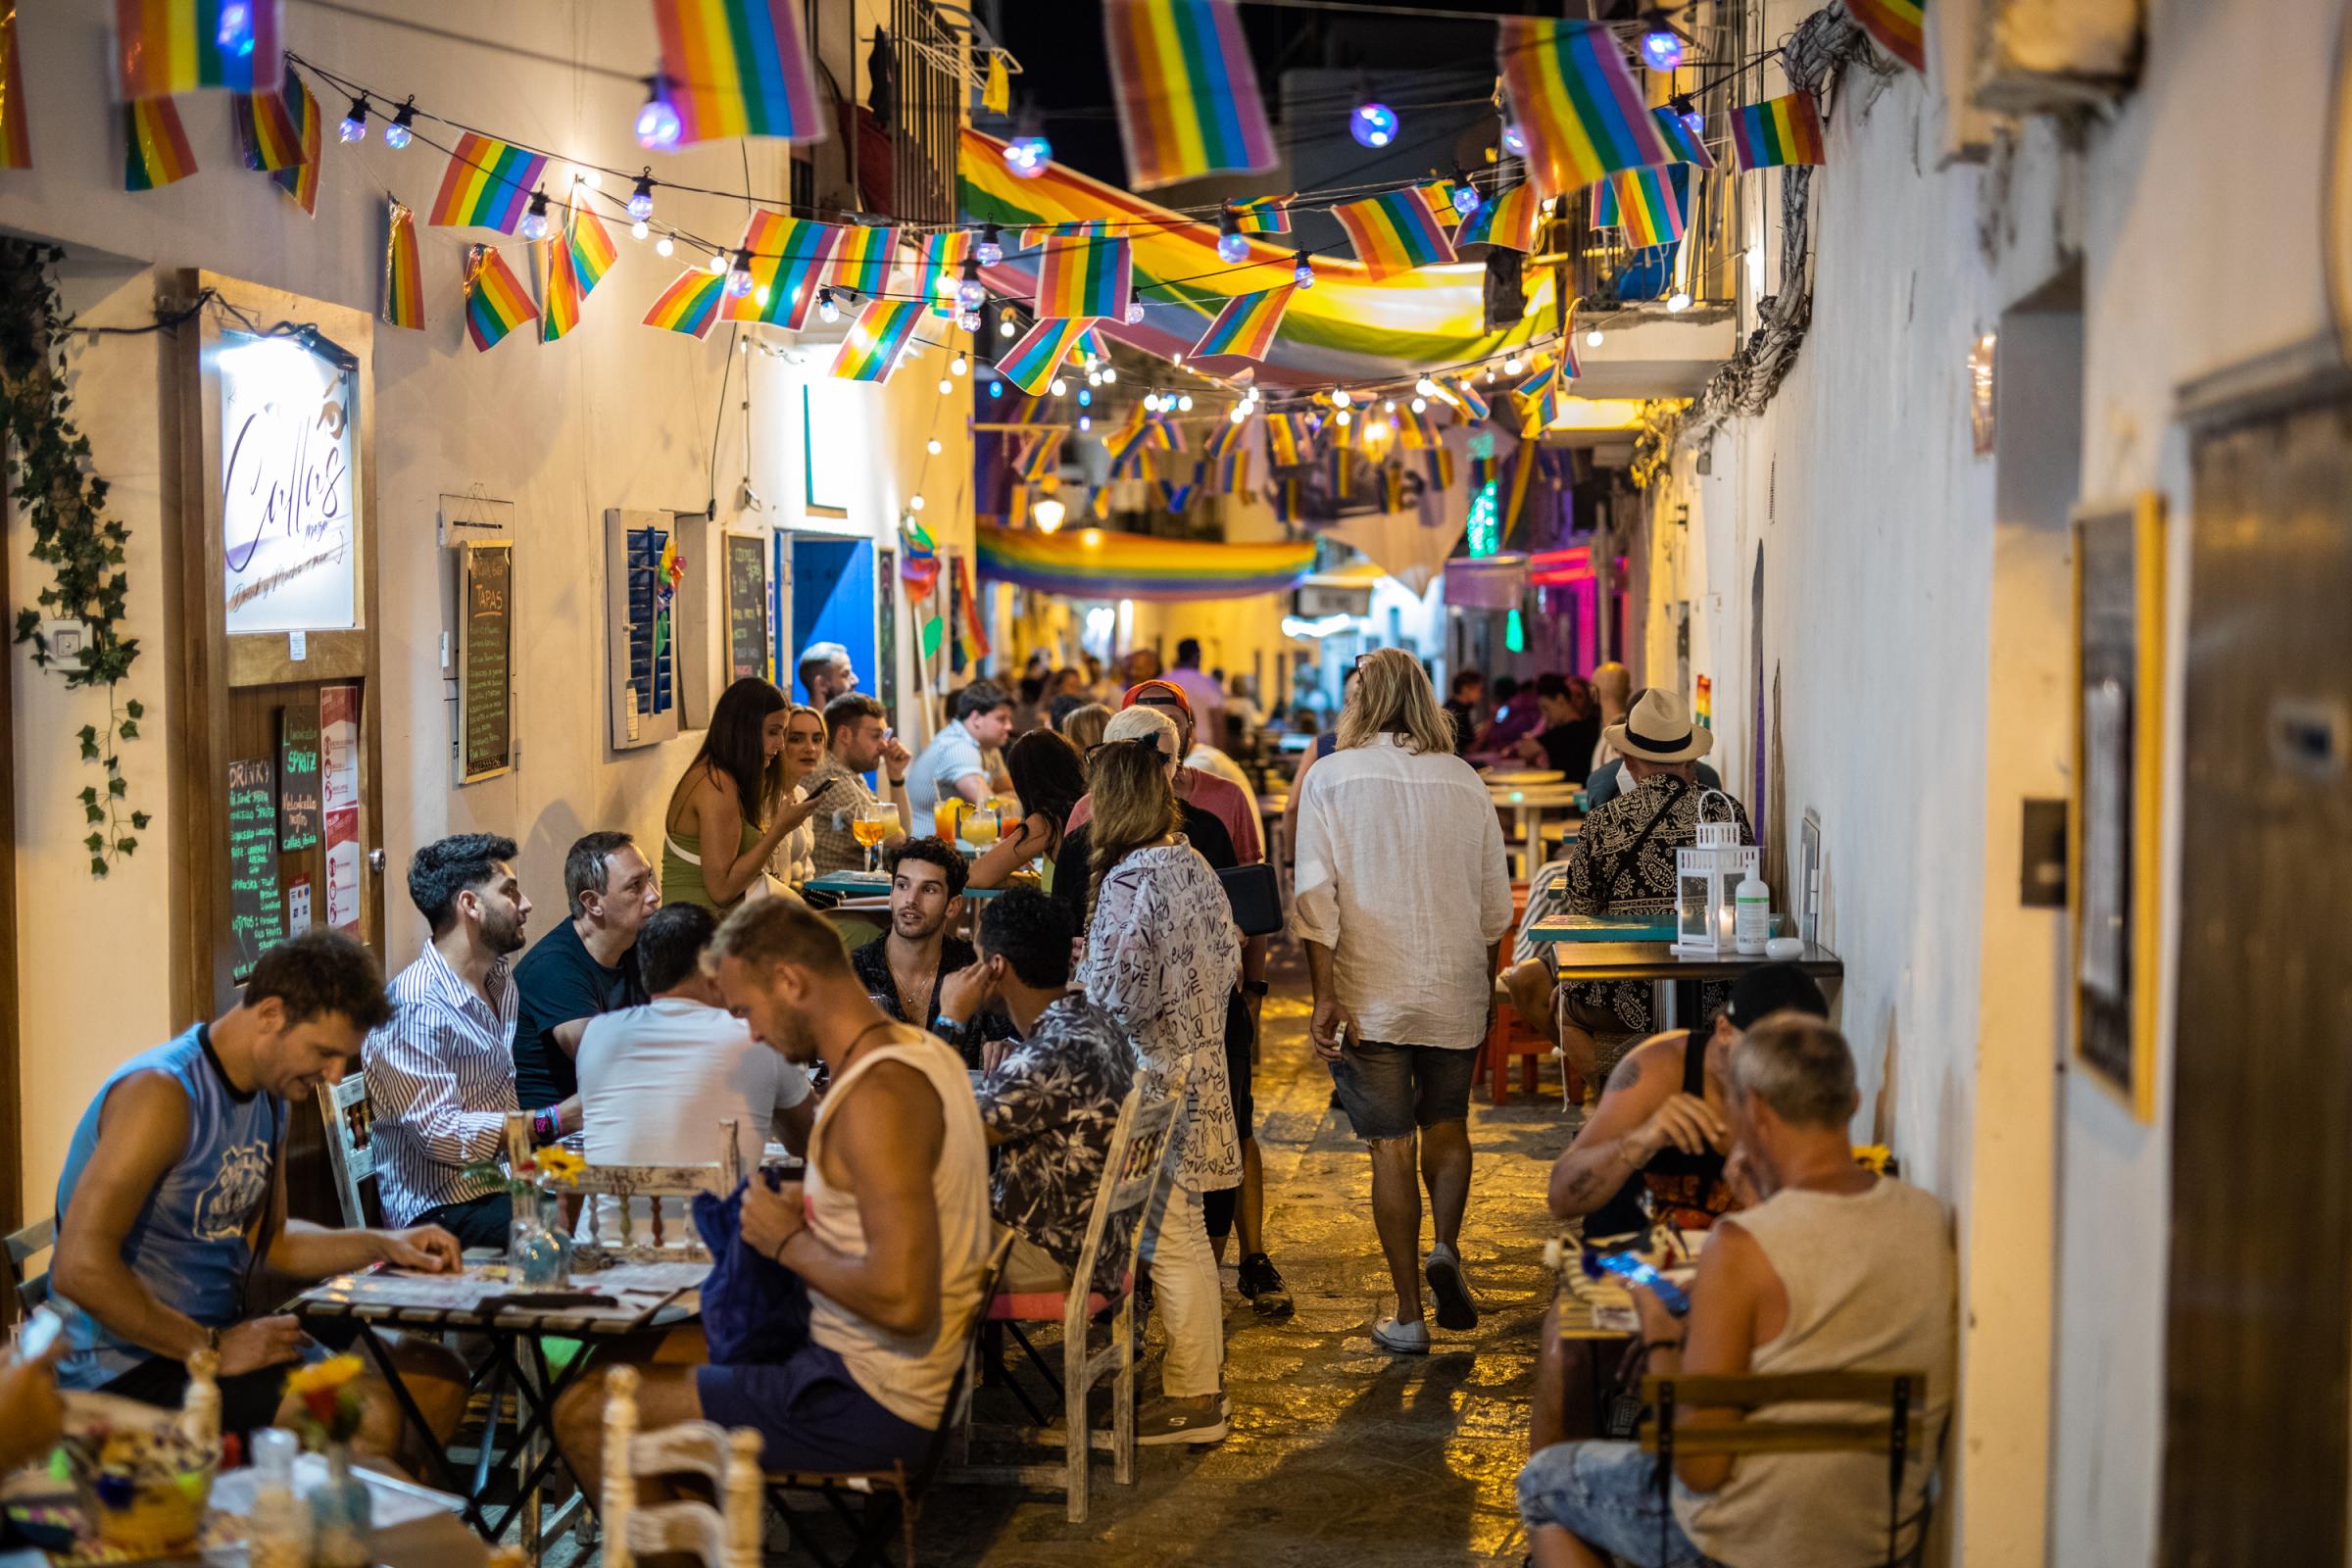 Gay Pride Takes Place In Ibiza - IBIZA, SPAIN - SEPTEMBER 17: Atmosphere in the LGTB area...